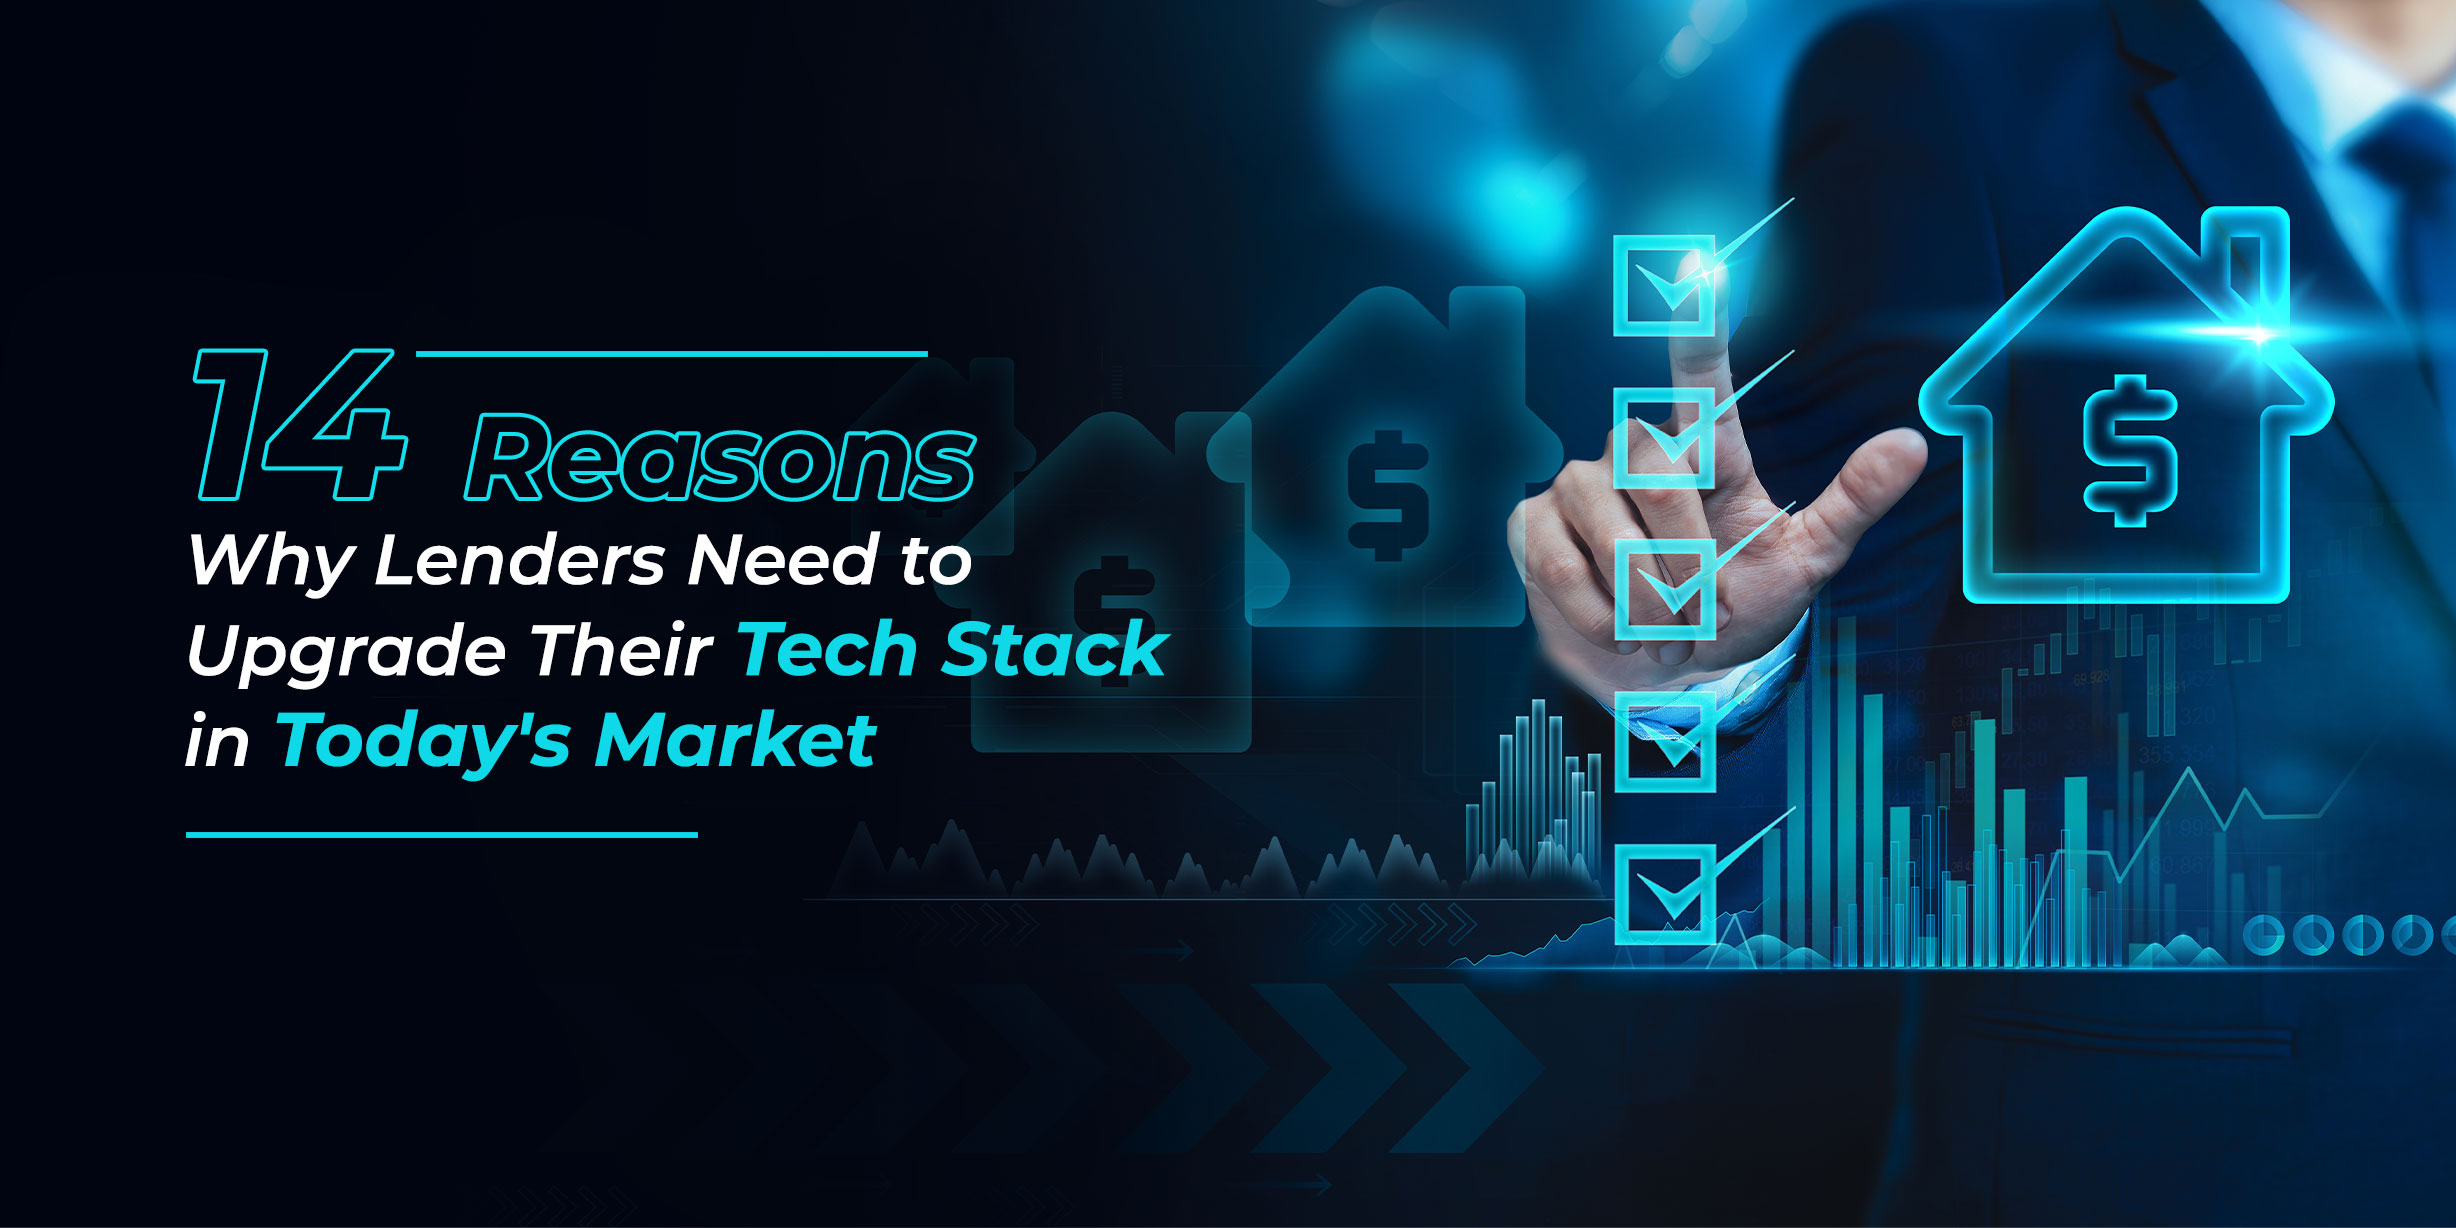 14 Reasons Why Lenders Need to Upgrade Their Tech Stack in Today's Market